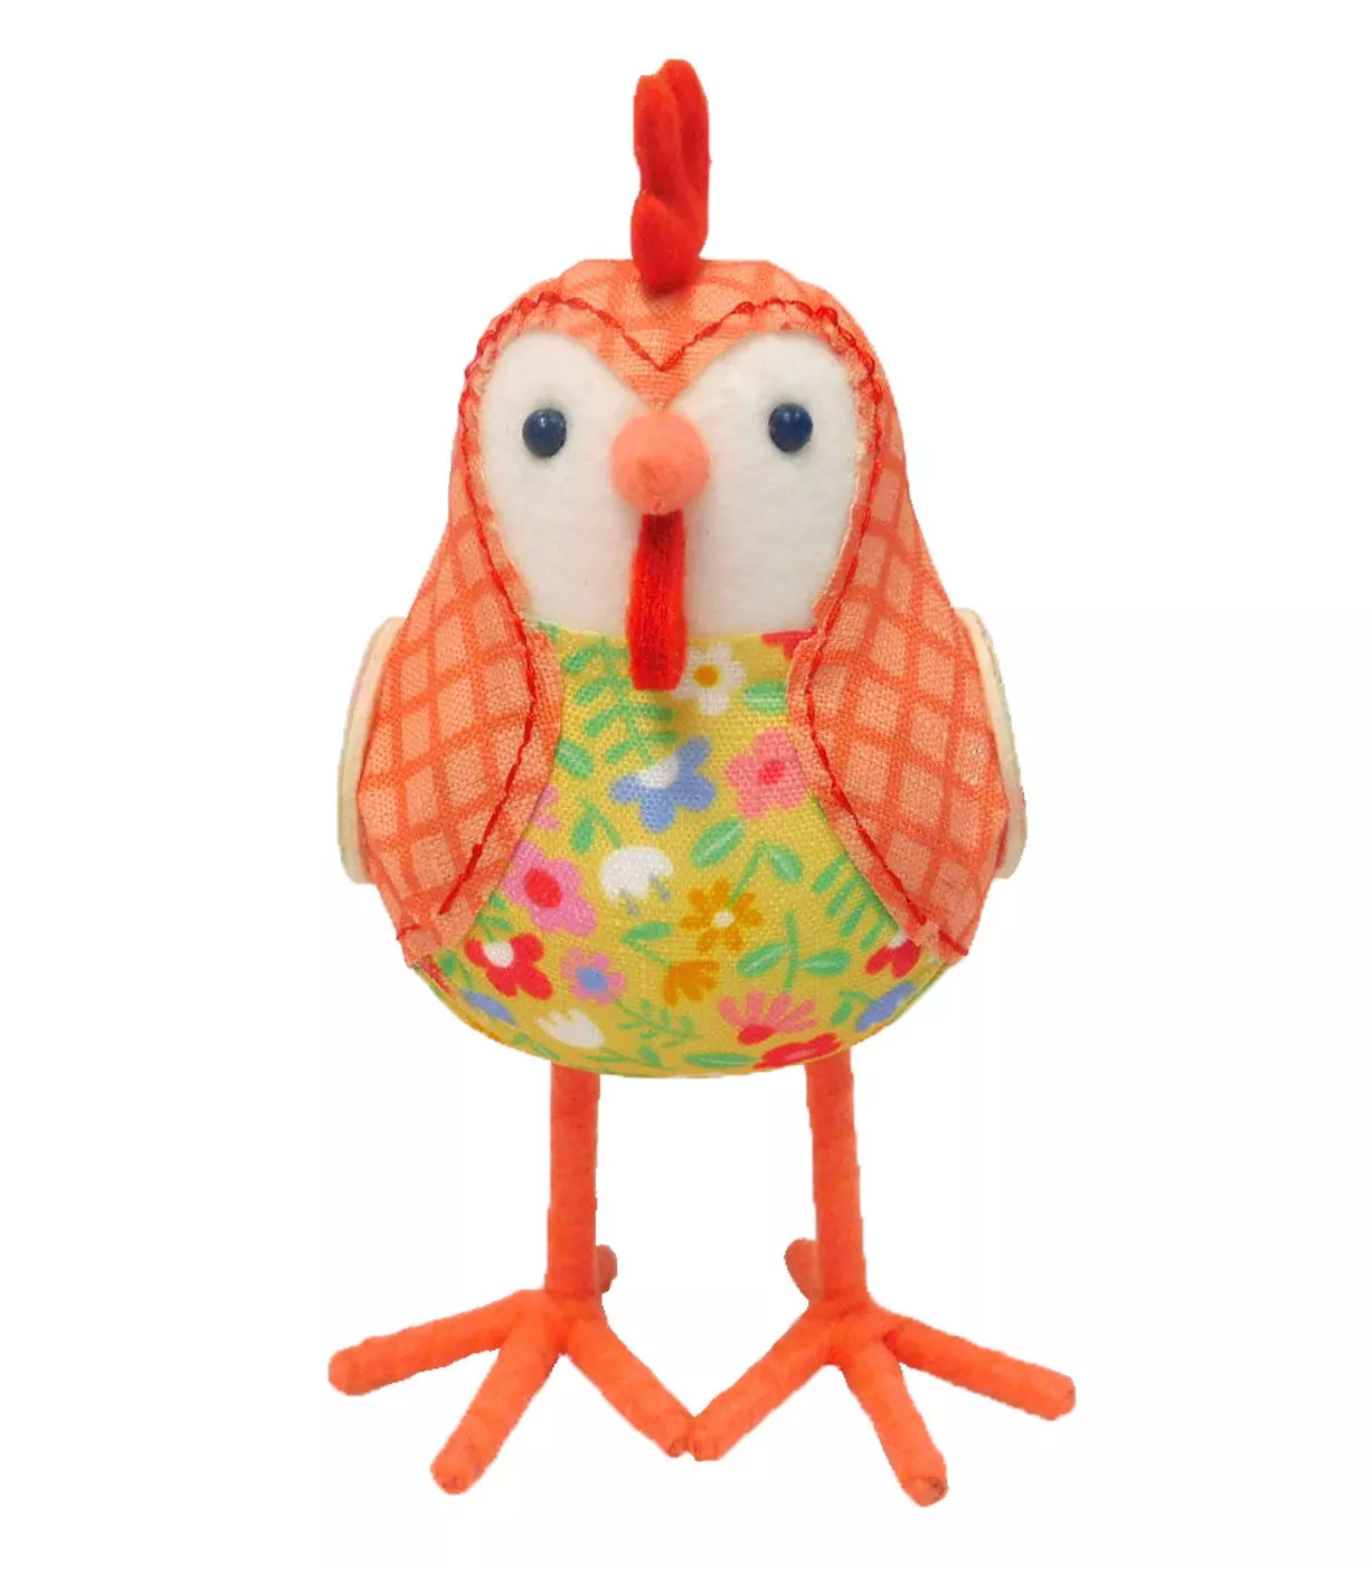 Easter 2021 Spritz Featherly Friends Fabric Bird Roaster Target New with Tag